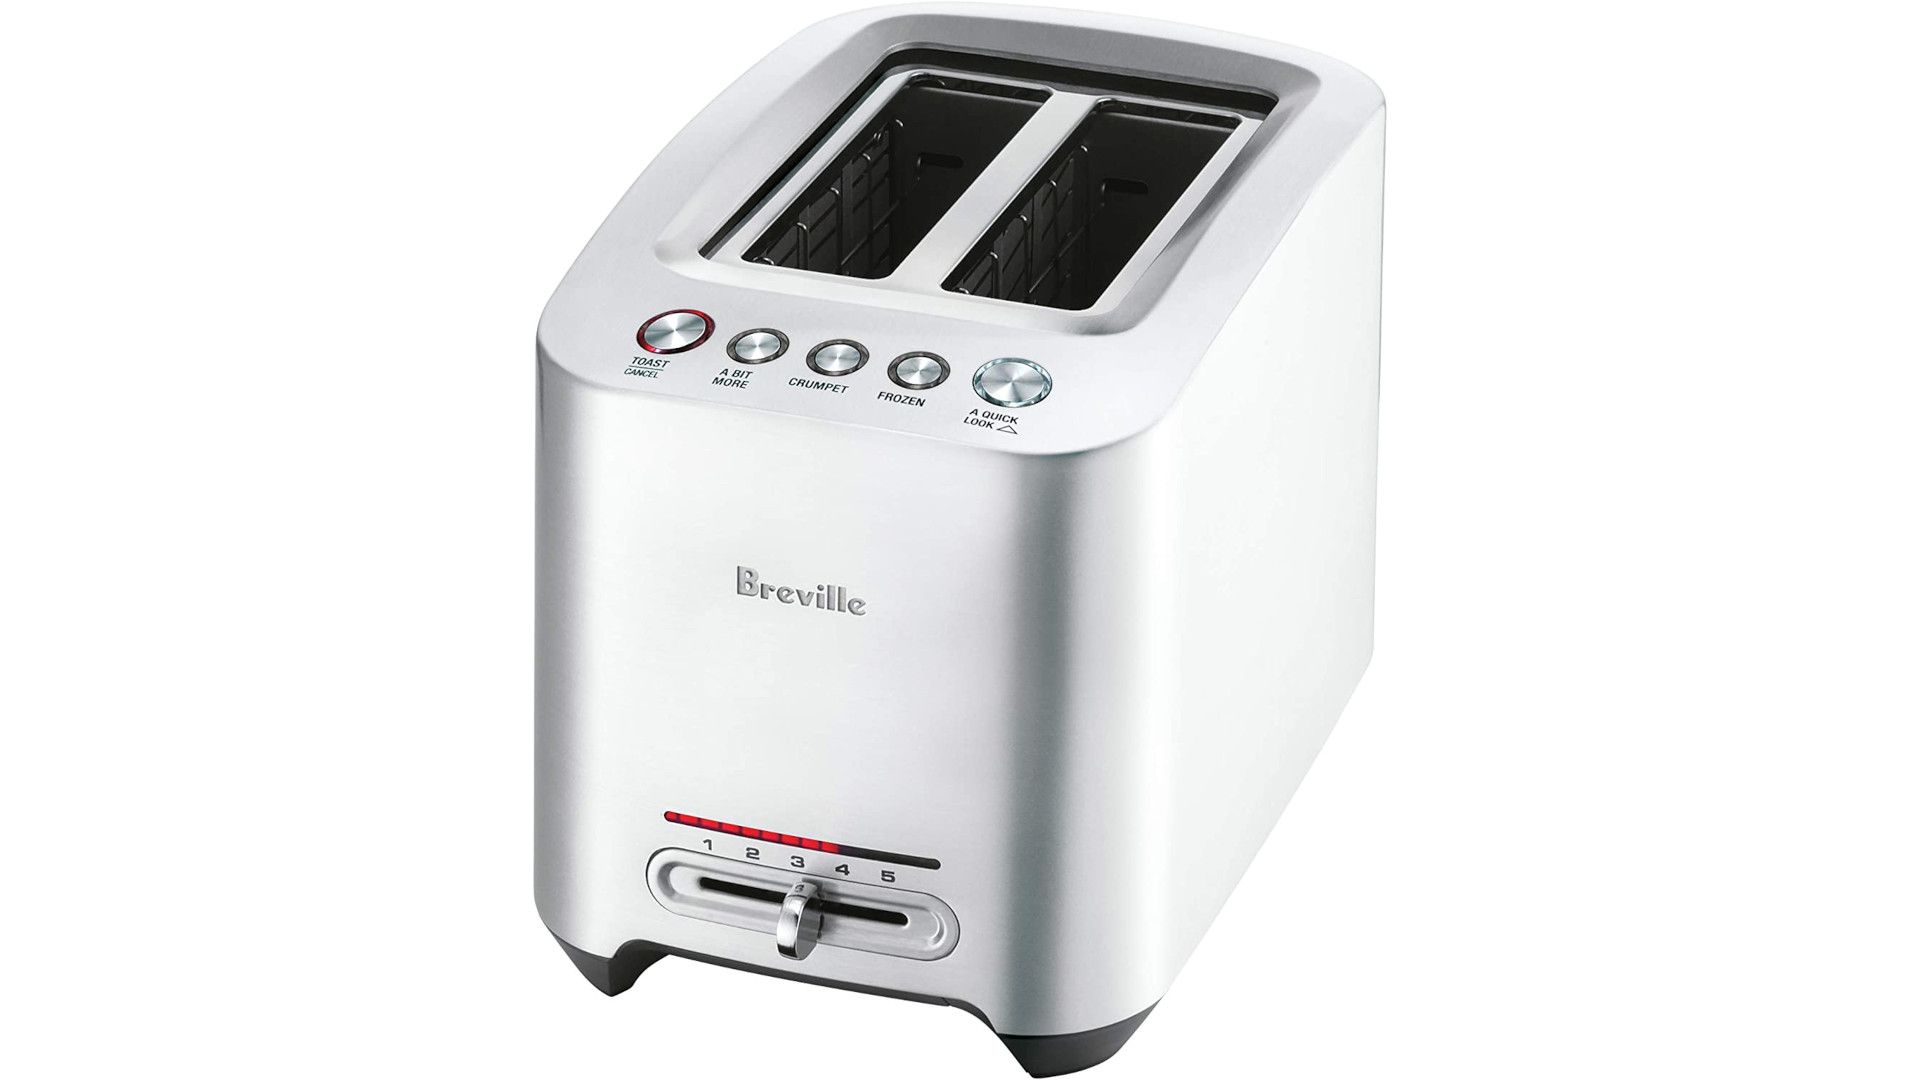 A smart toaster is shown on a white background.